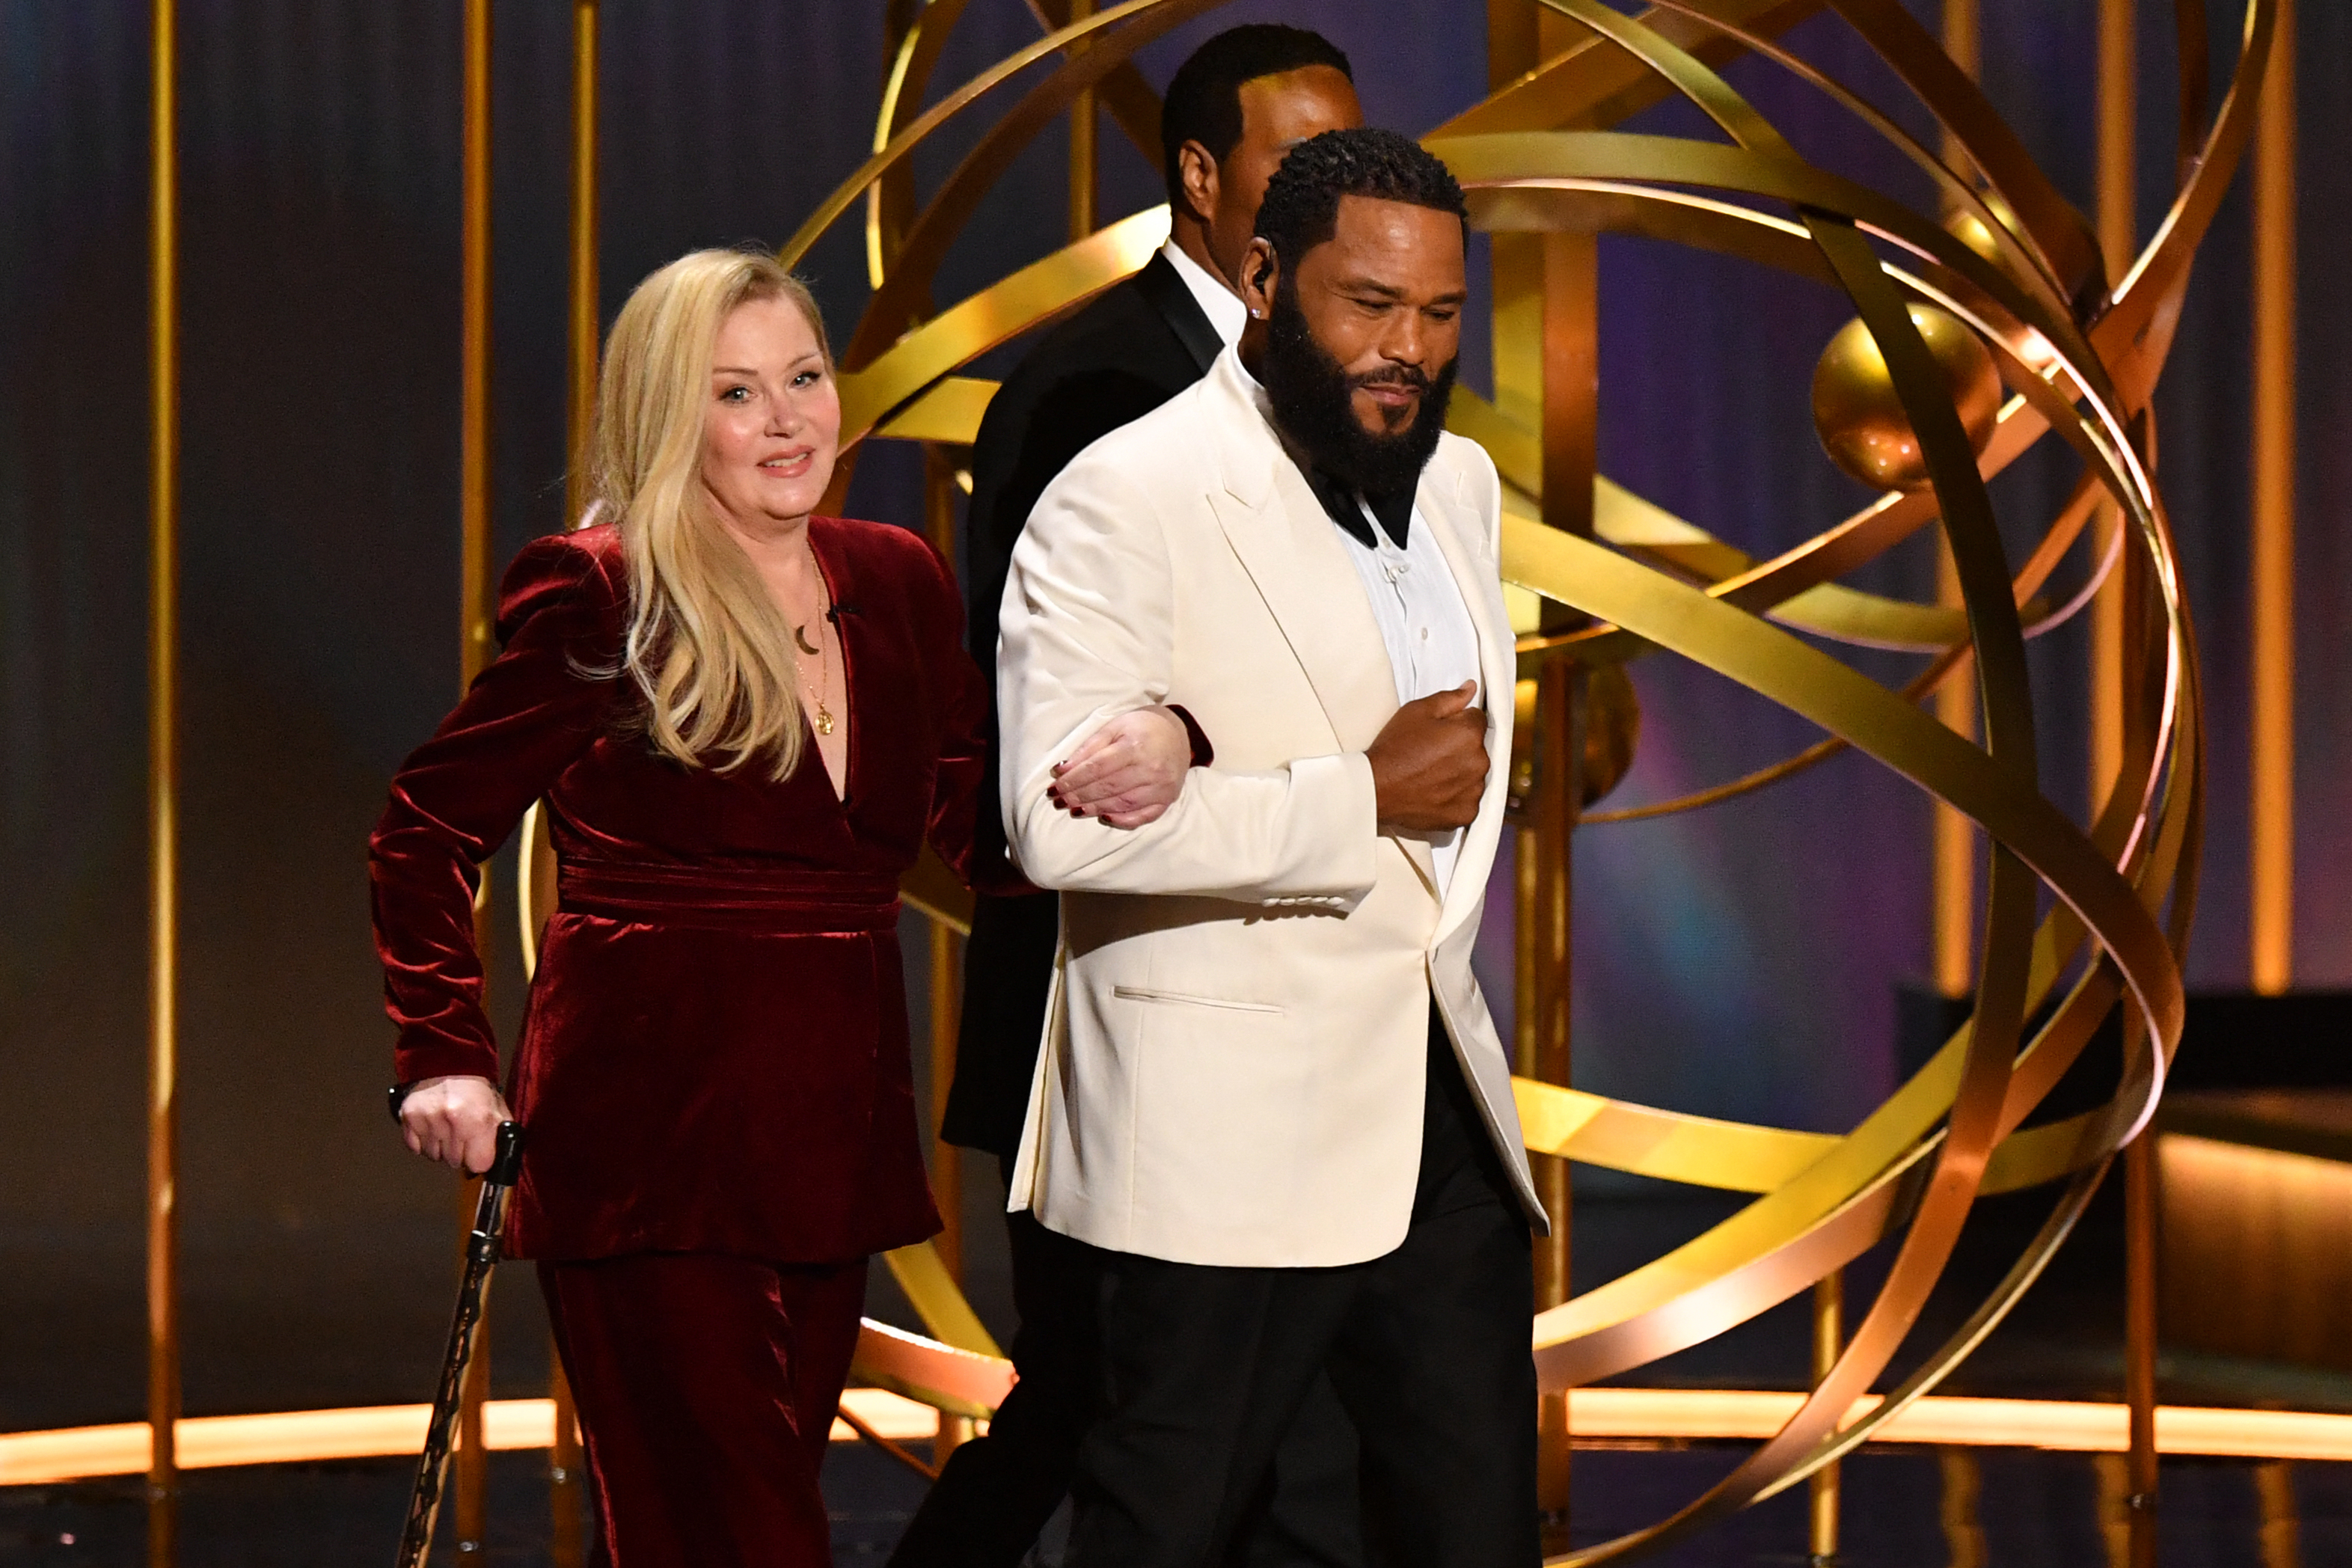 Christina walking on stage at the Emmy Awards with Anthony Anderson